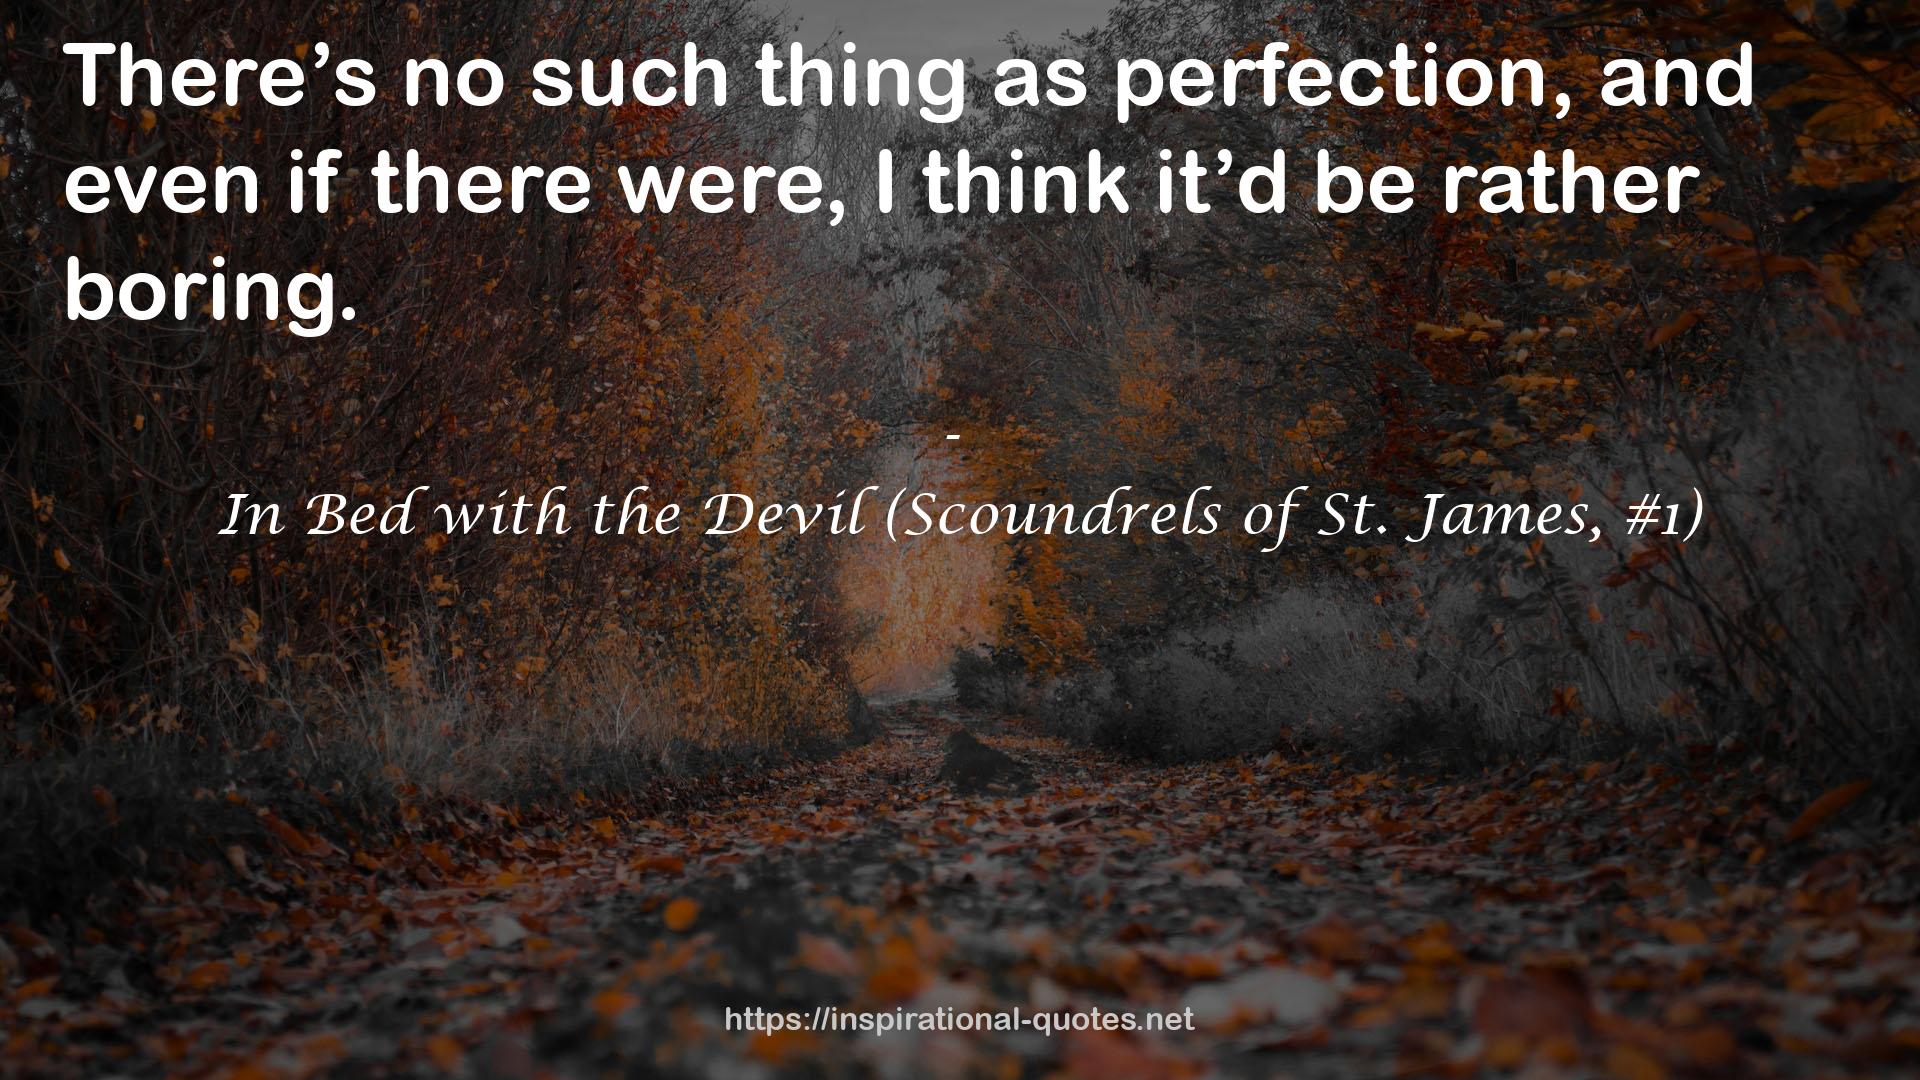 In Bed with the Devil (Scoundrels of St. James, #1) QUOTES